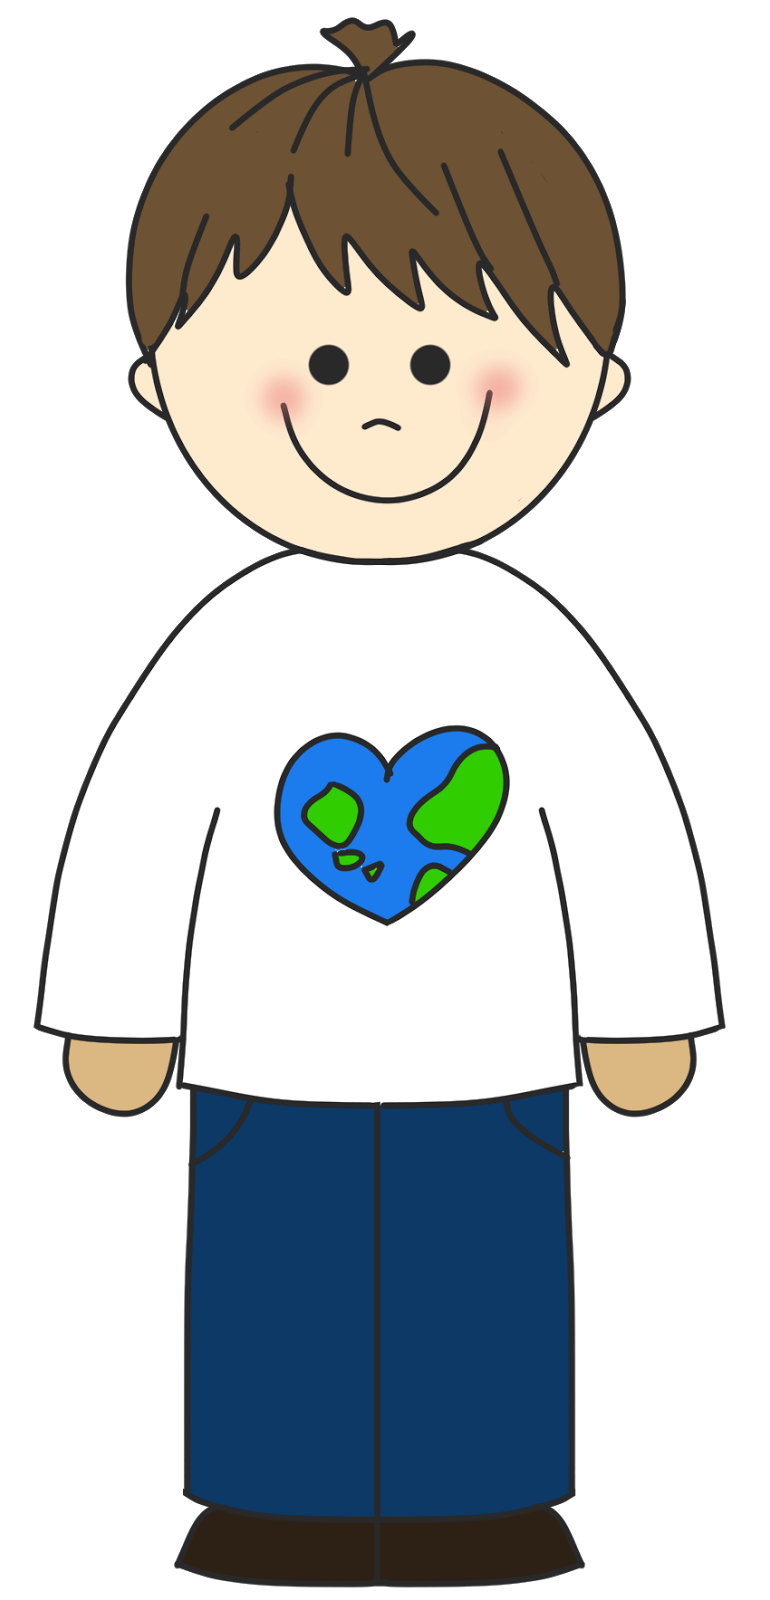 Free boy cliparts download. Body clipart person